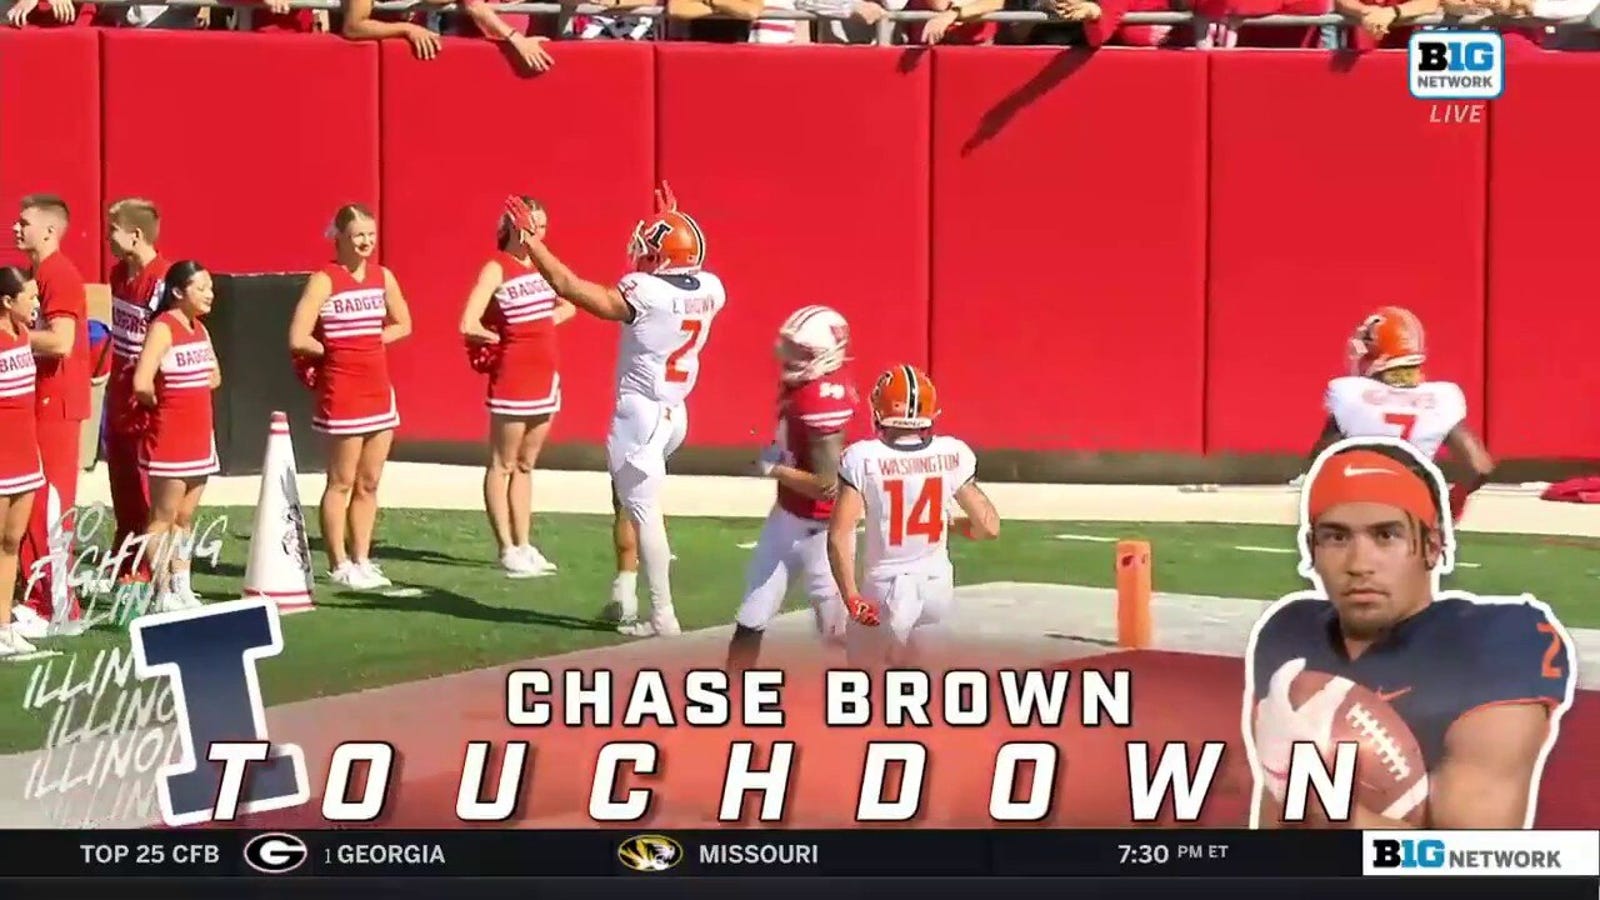 Highlight: Chase Brown goes 49 yards to the house